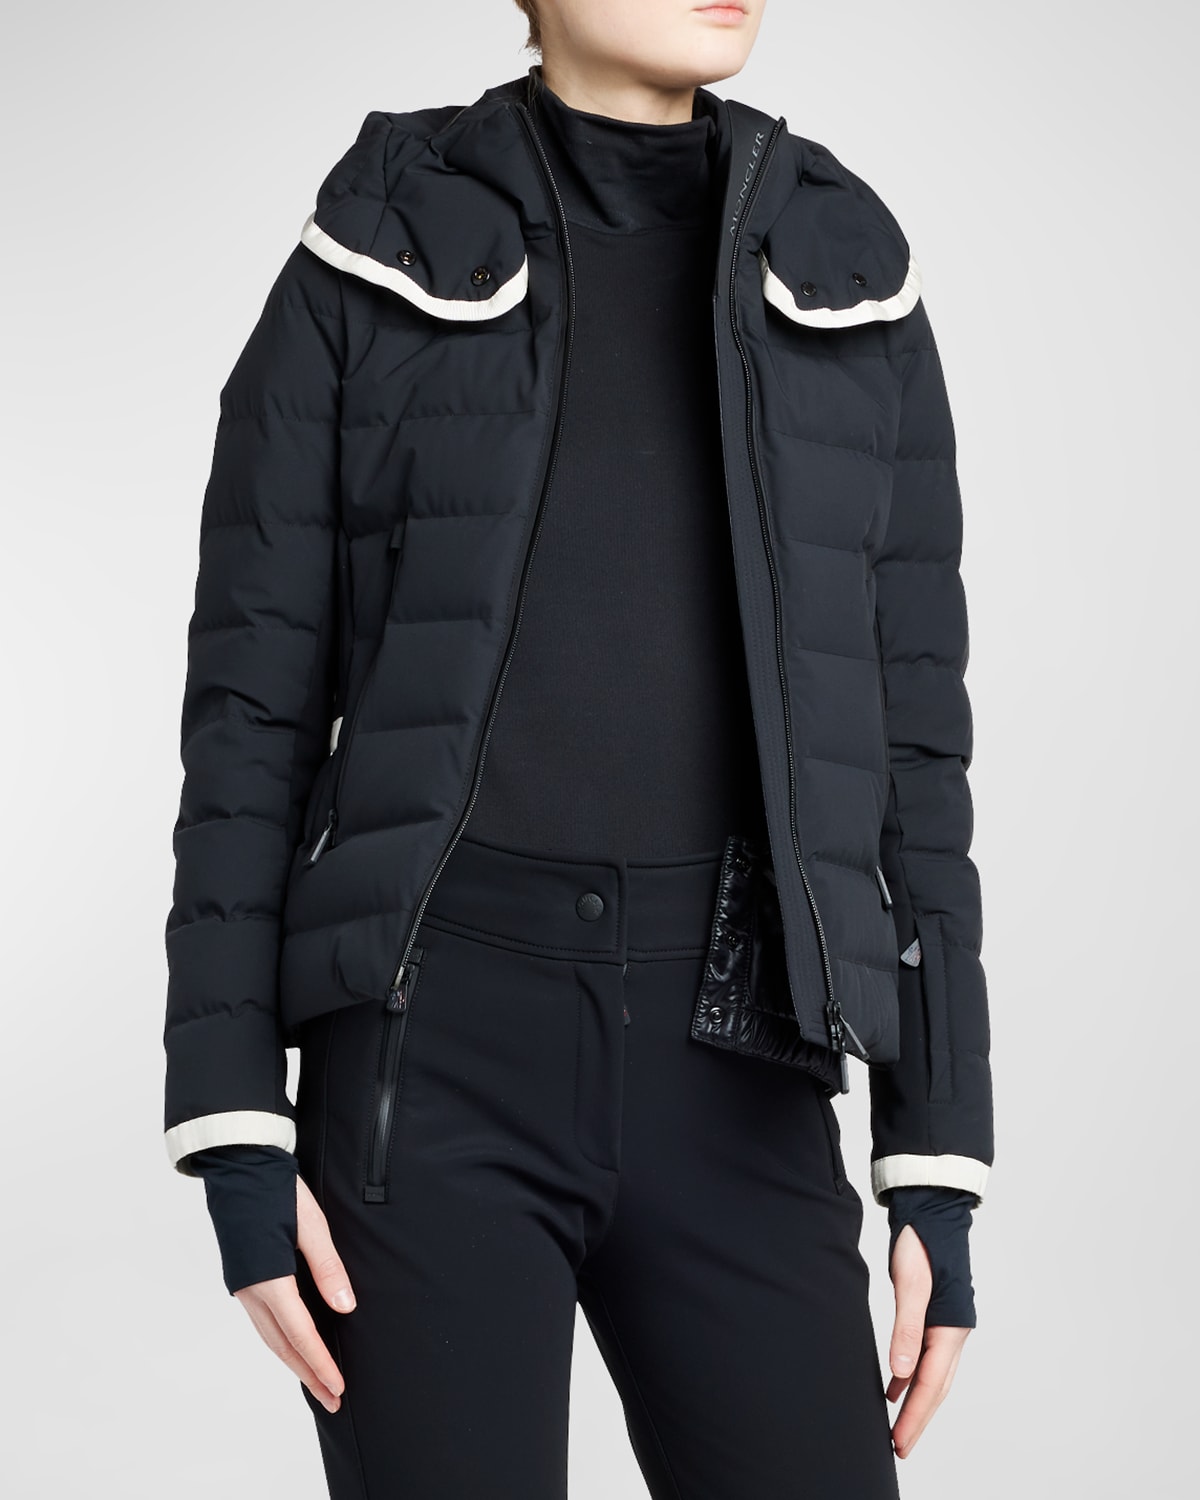 Moncler Lamoura Puffer Jacket With Contrast Trim In Black